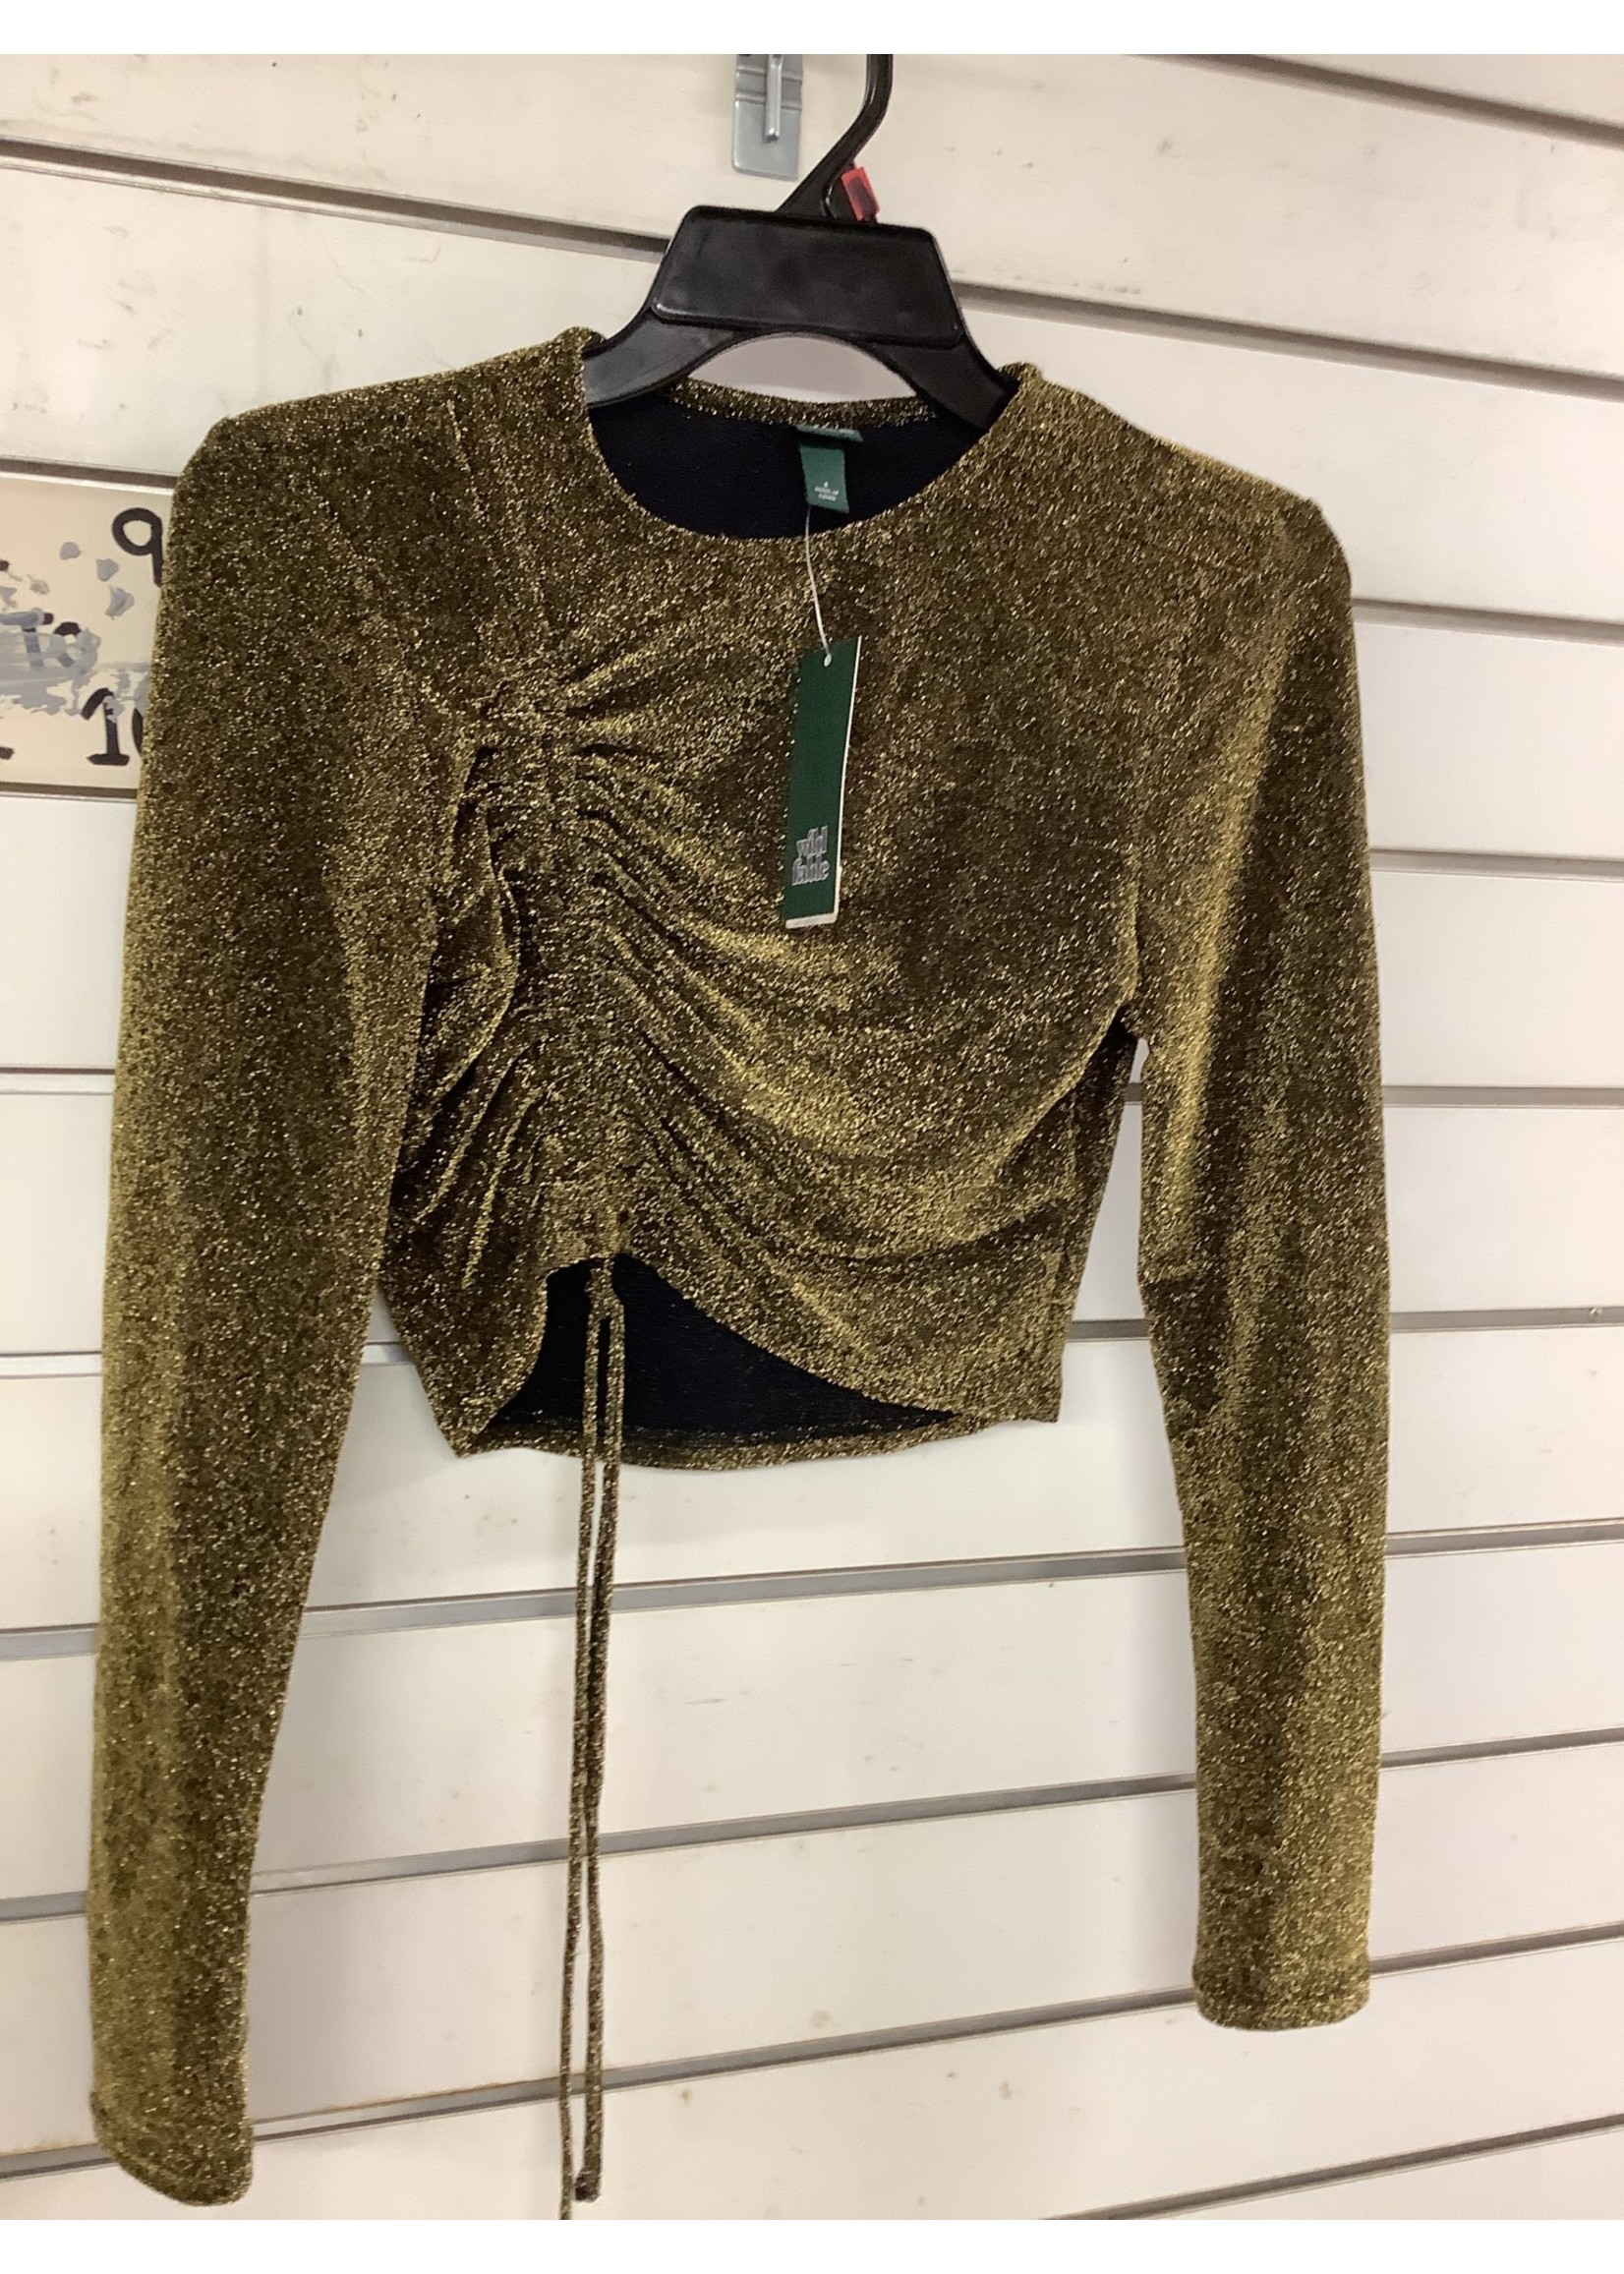 Wild fable Black/Gold Sparkle long sleeve top S